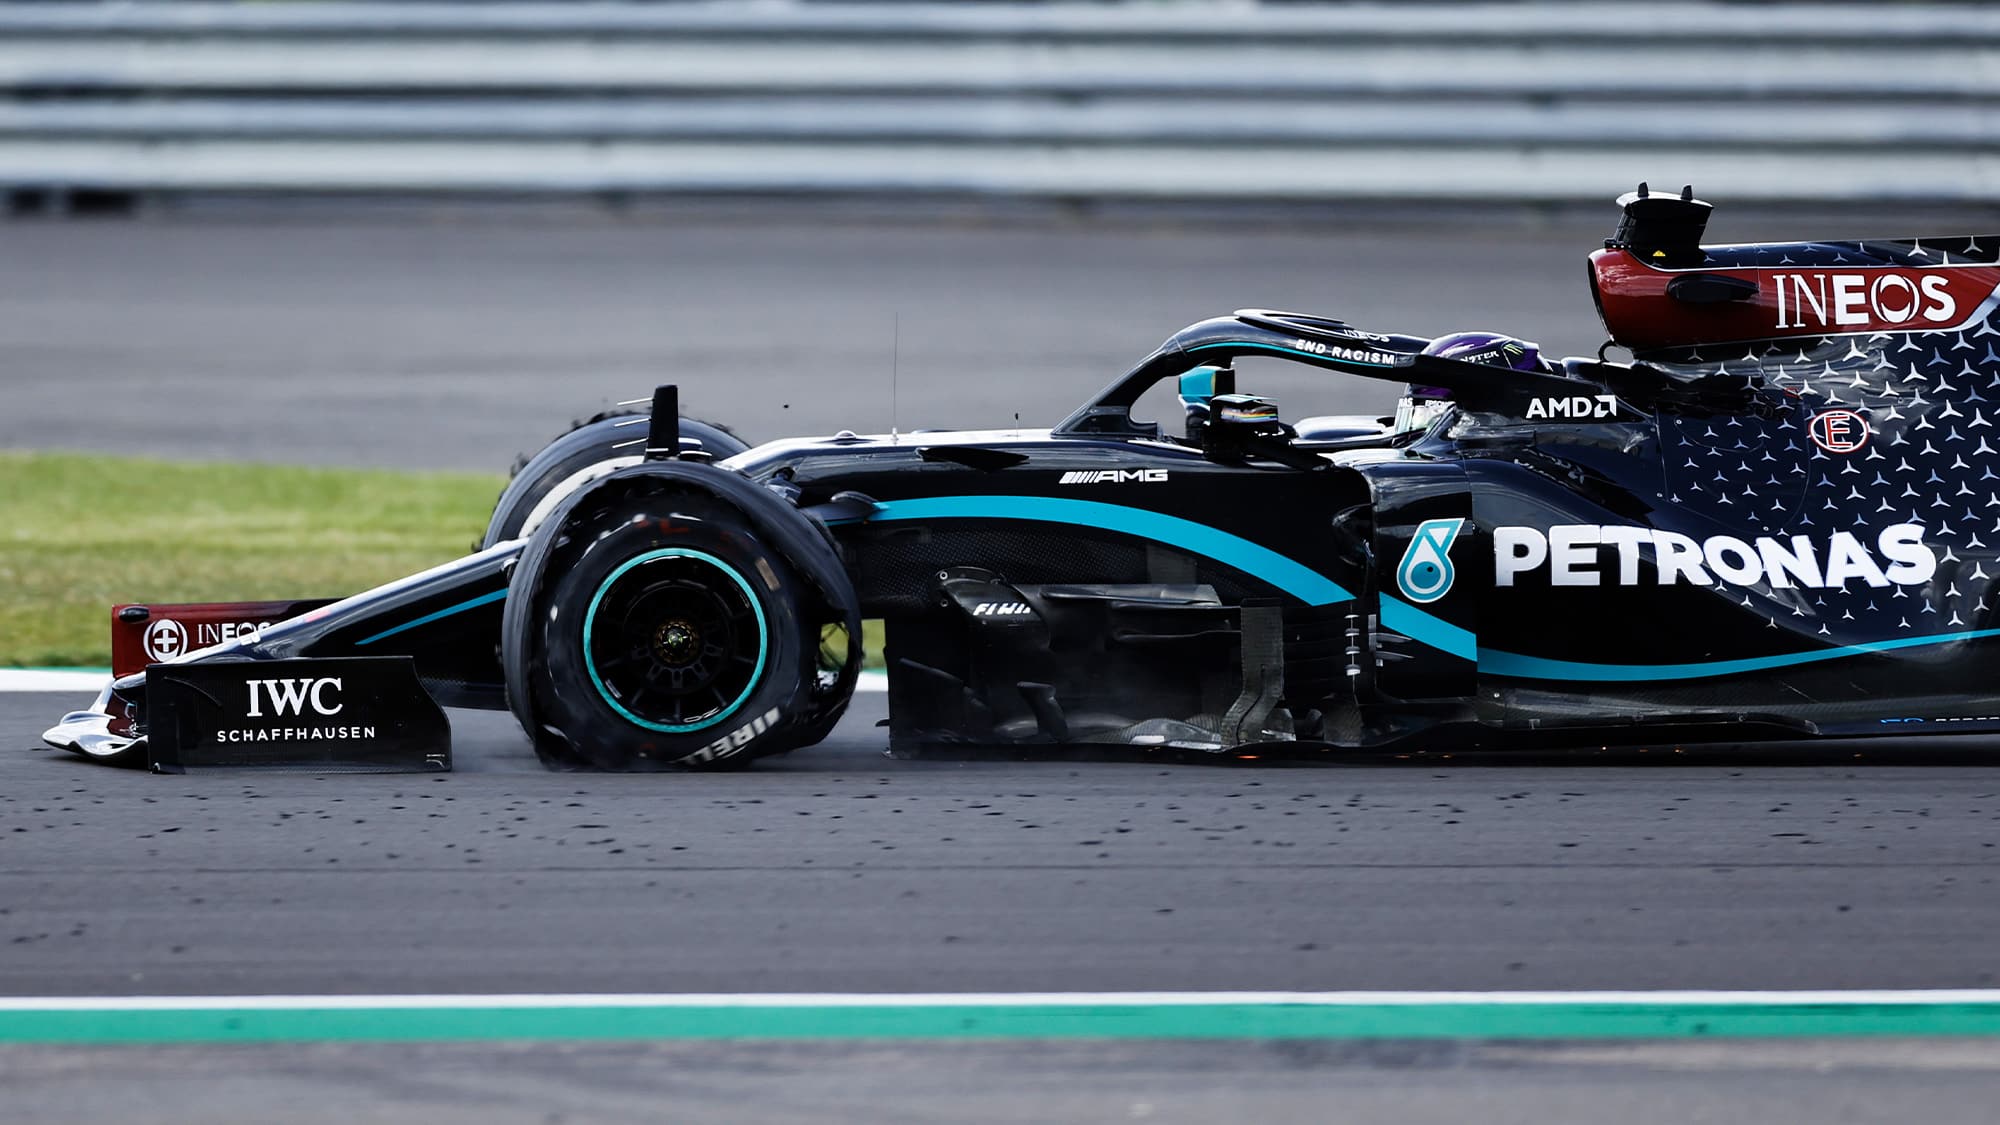 Lewis Hamilton's tyre fails on the final lap of the 2020 F1 British Grand Prix at Silverstone